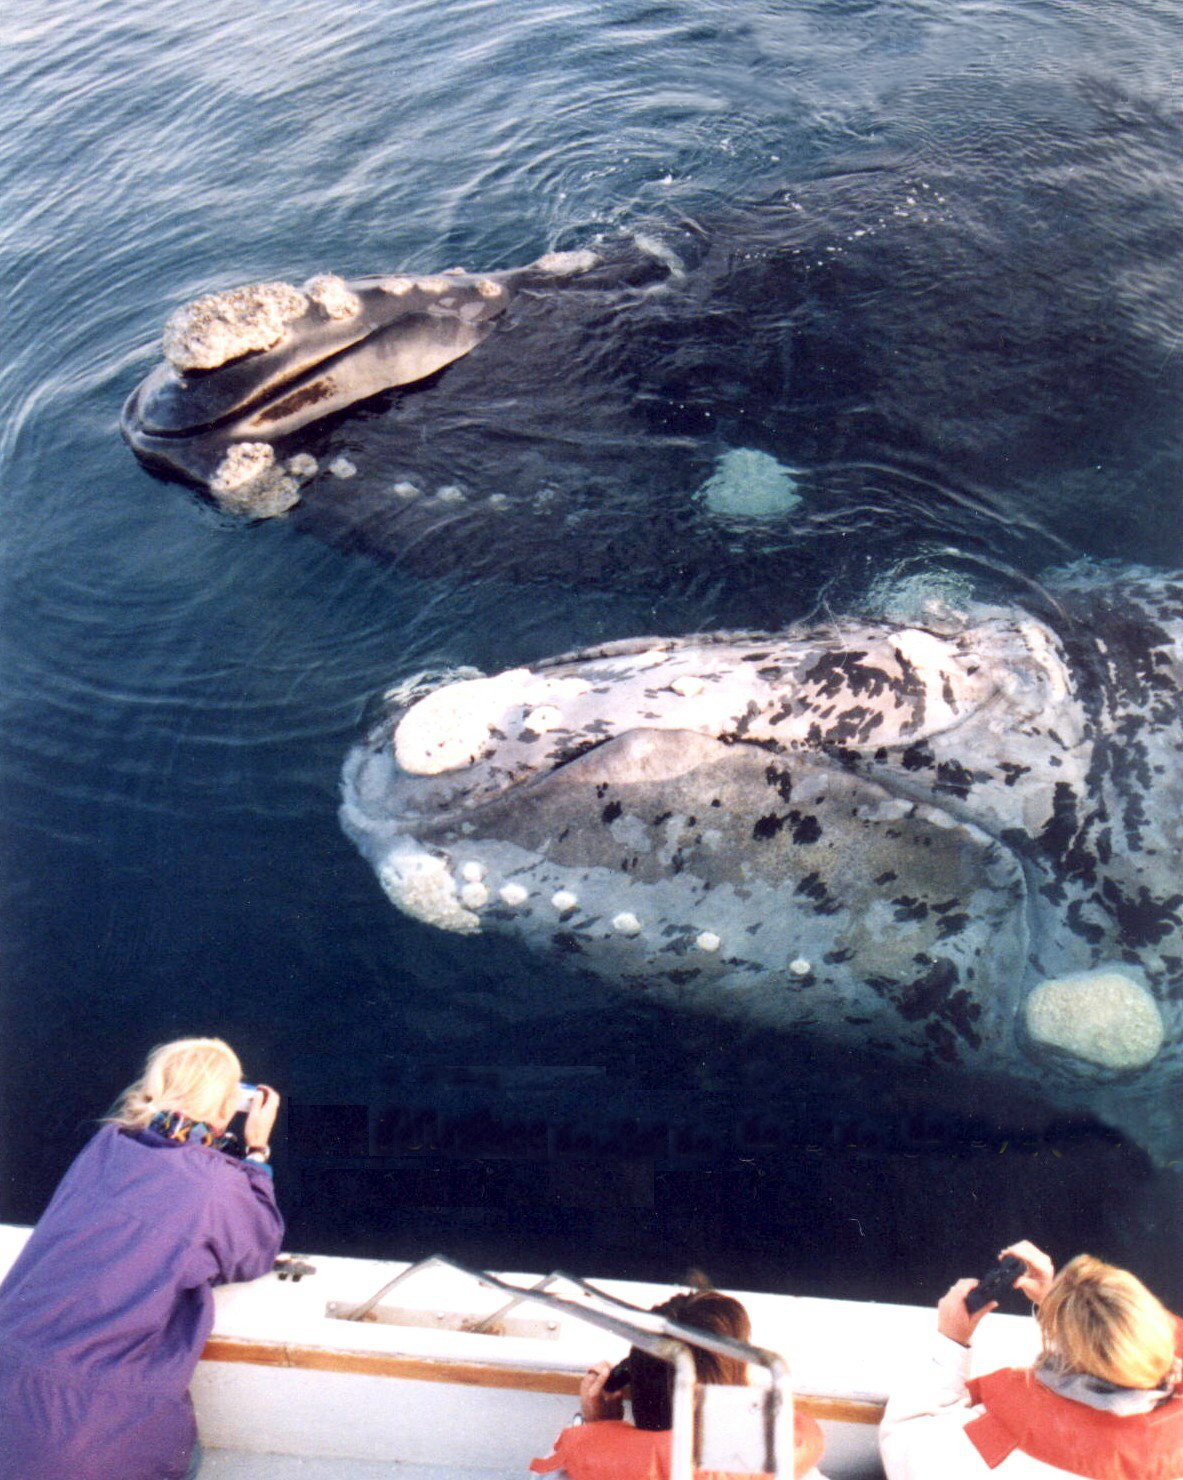 Whale Watching & Sea Angling | Iceland Whale Watching Hauganes Tours